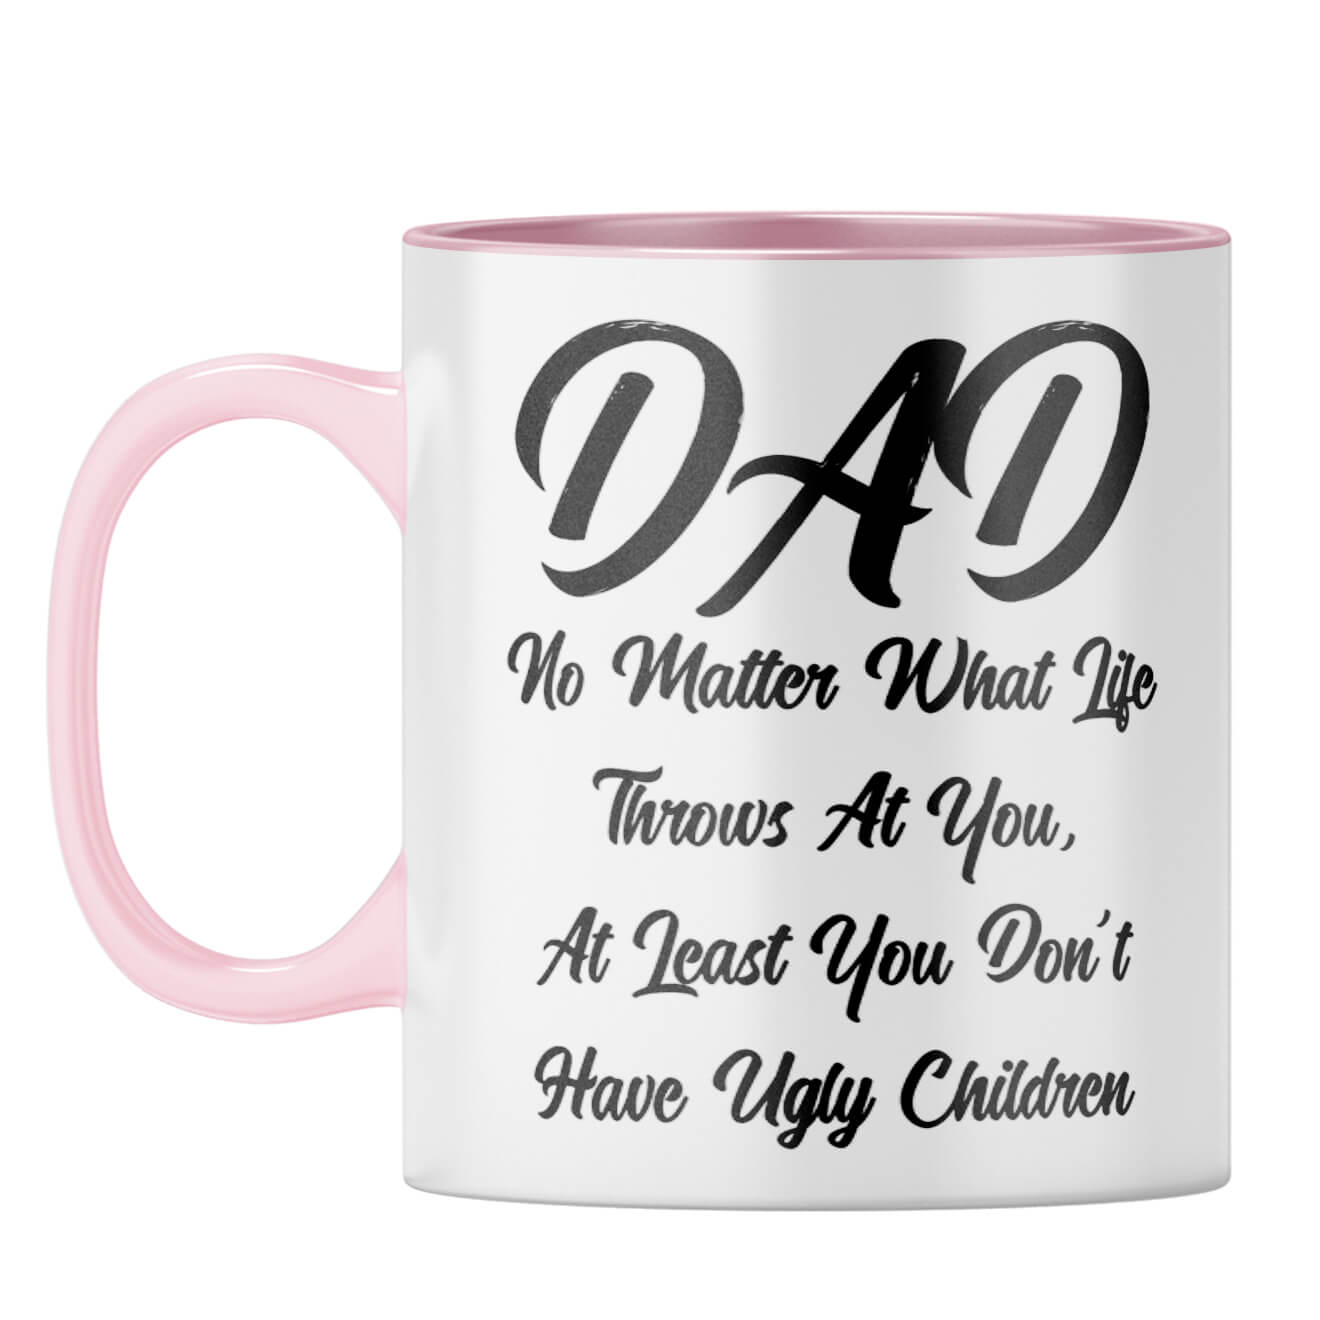 Dad Doesn't Have Ugly Children Coffee Mug Pink